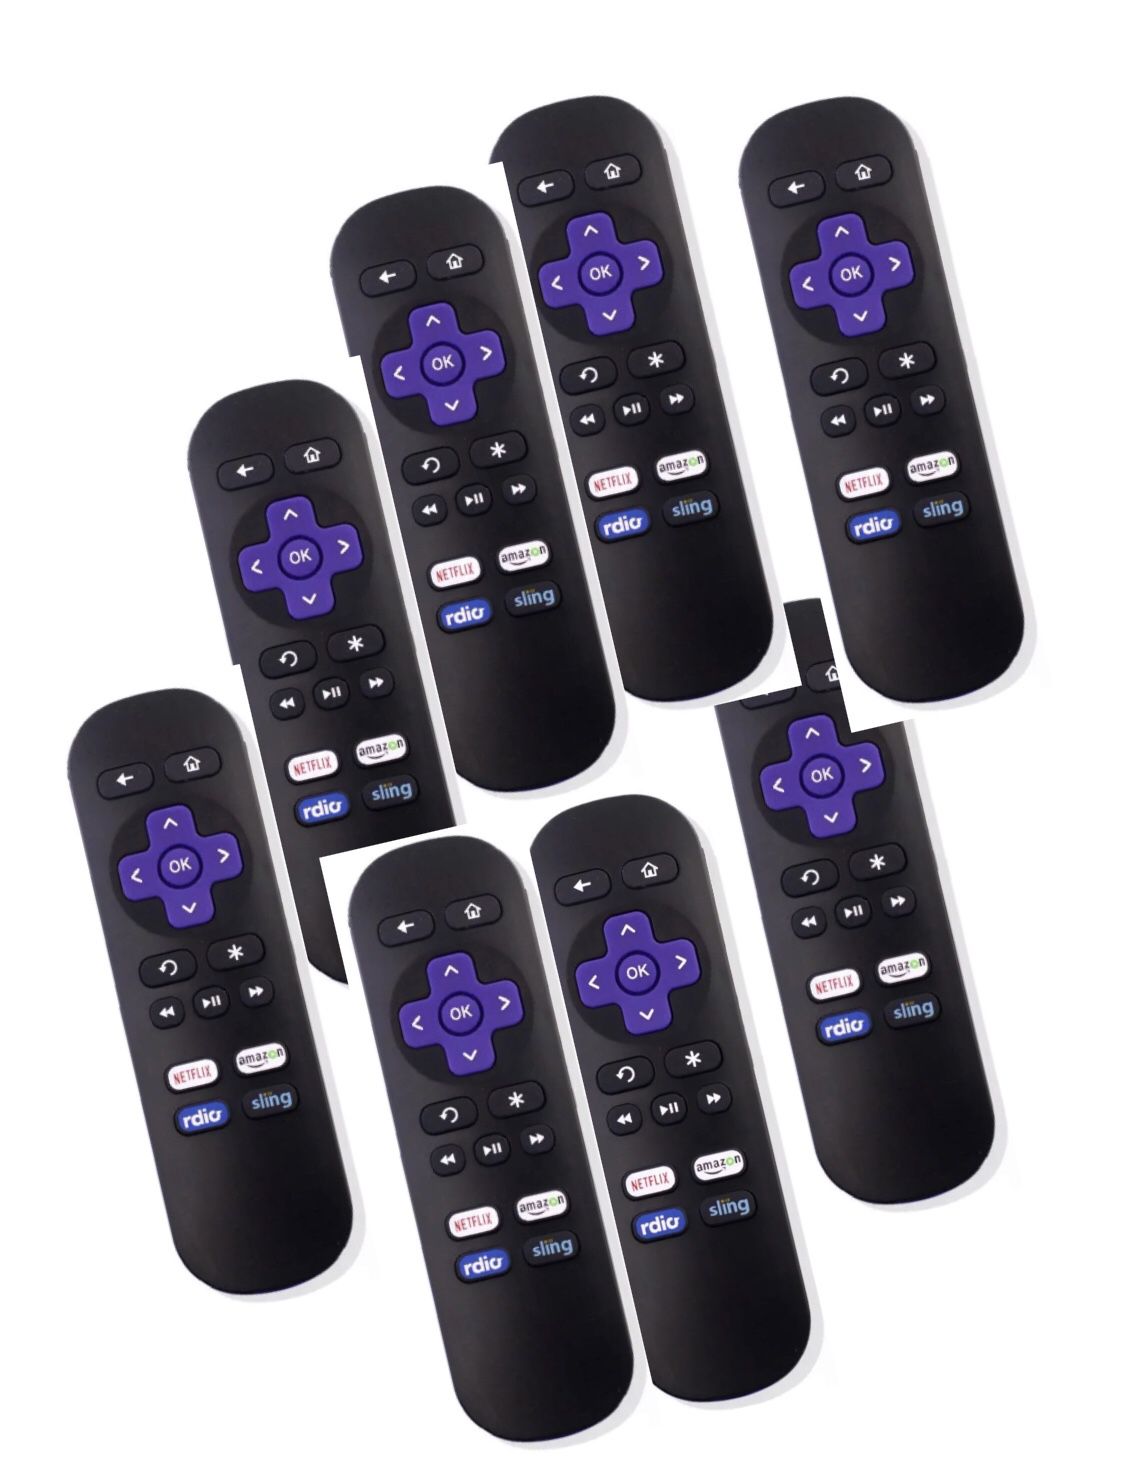 New Lot of 40 ROKU Replacement Remotes w/ NETFLIX/Amazon/Radio/Sling Shortcut Buttons